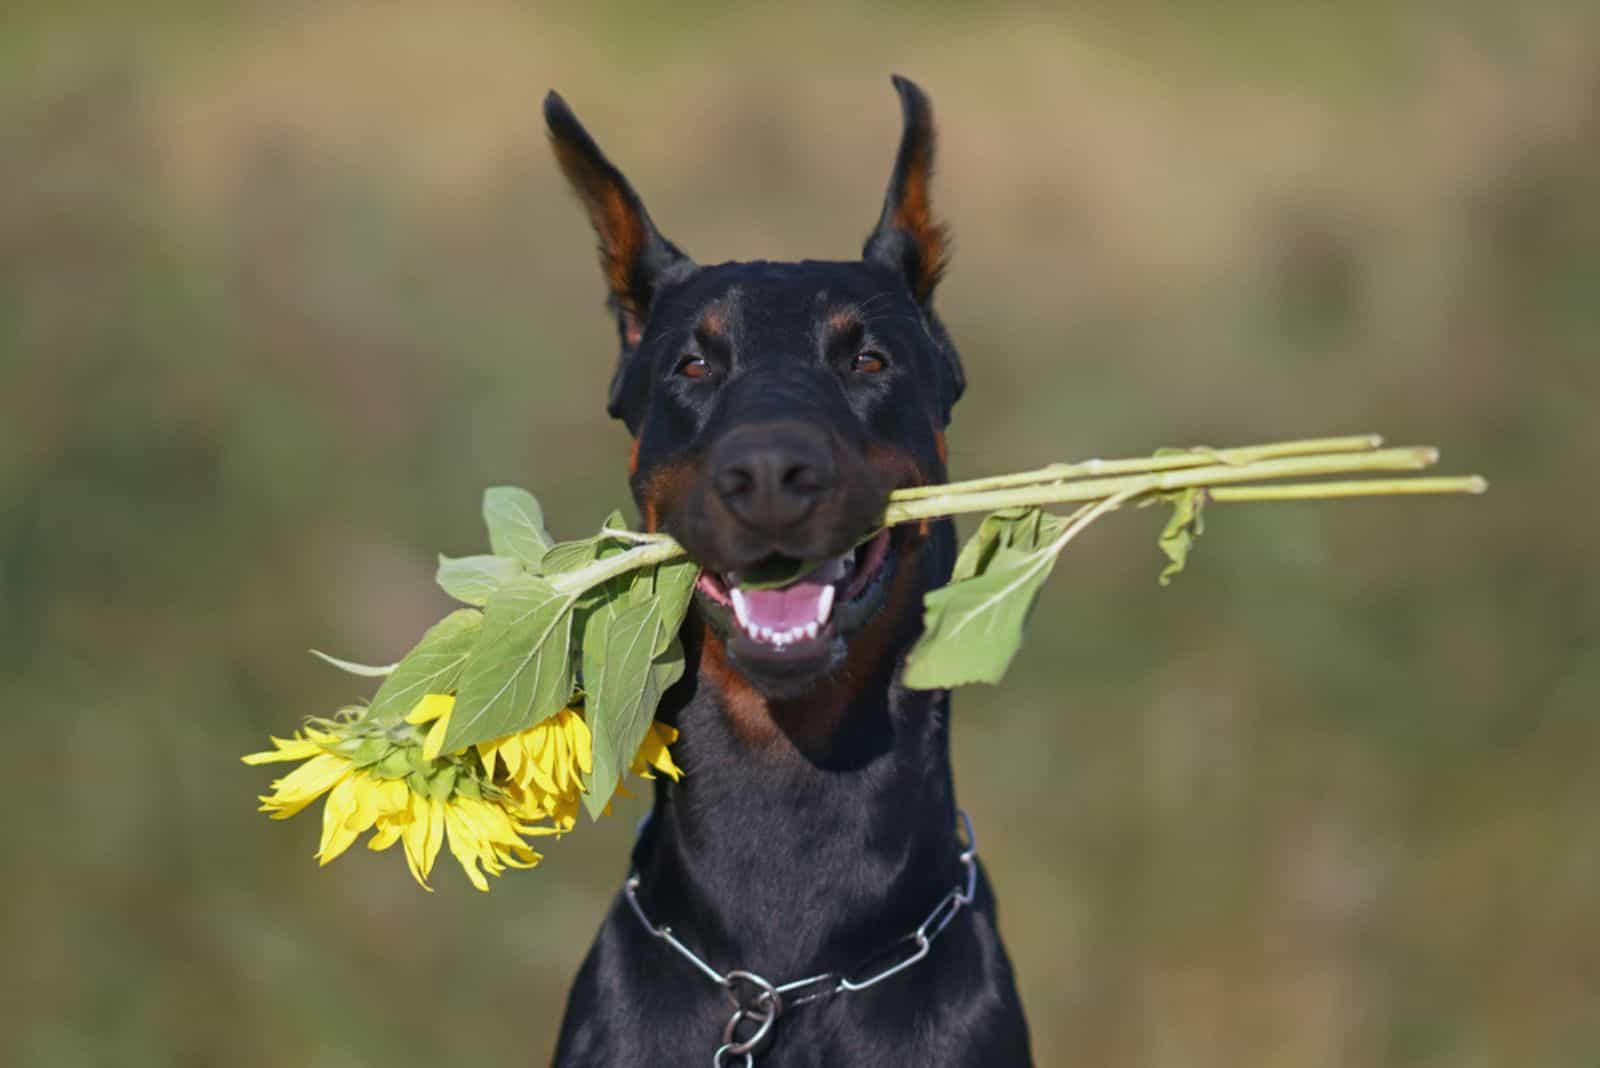  Doberman dog posing outdoors holding sunflowers in its mouth